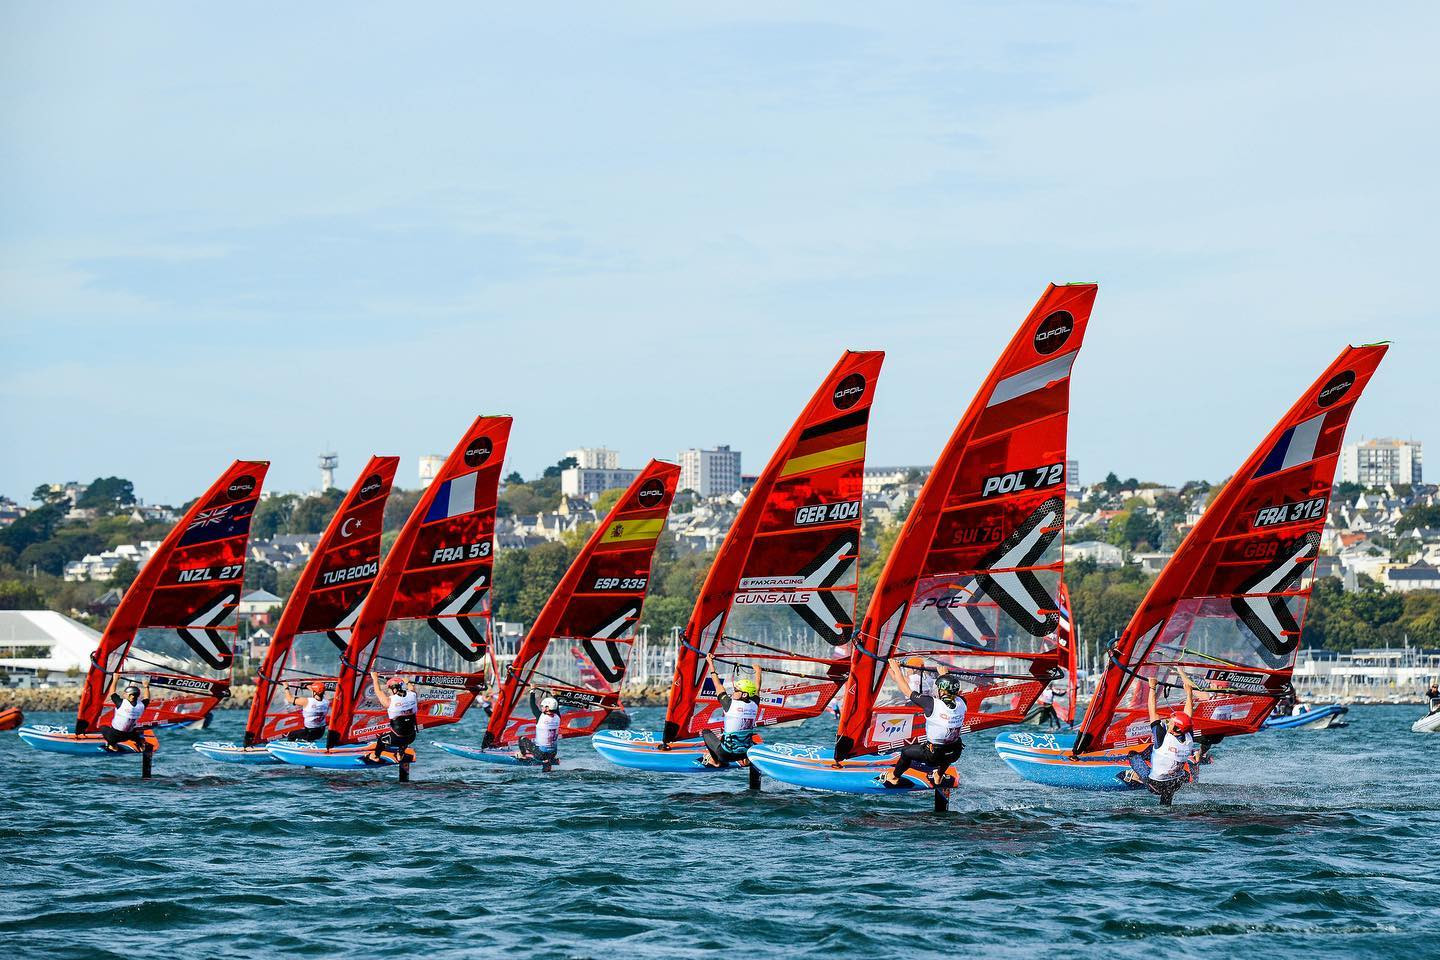 Perfect day from Koerdel widens gap in iQFOiL World Championships